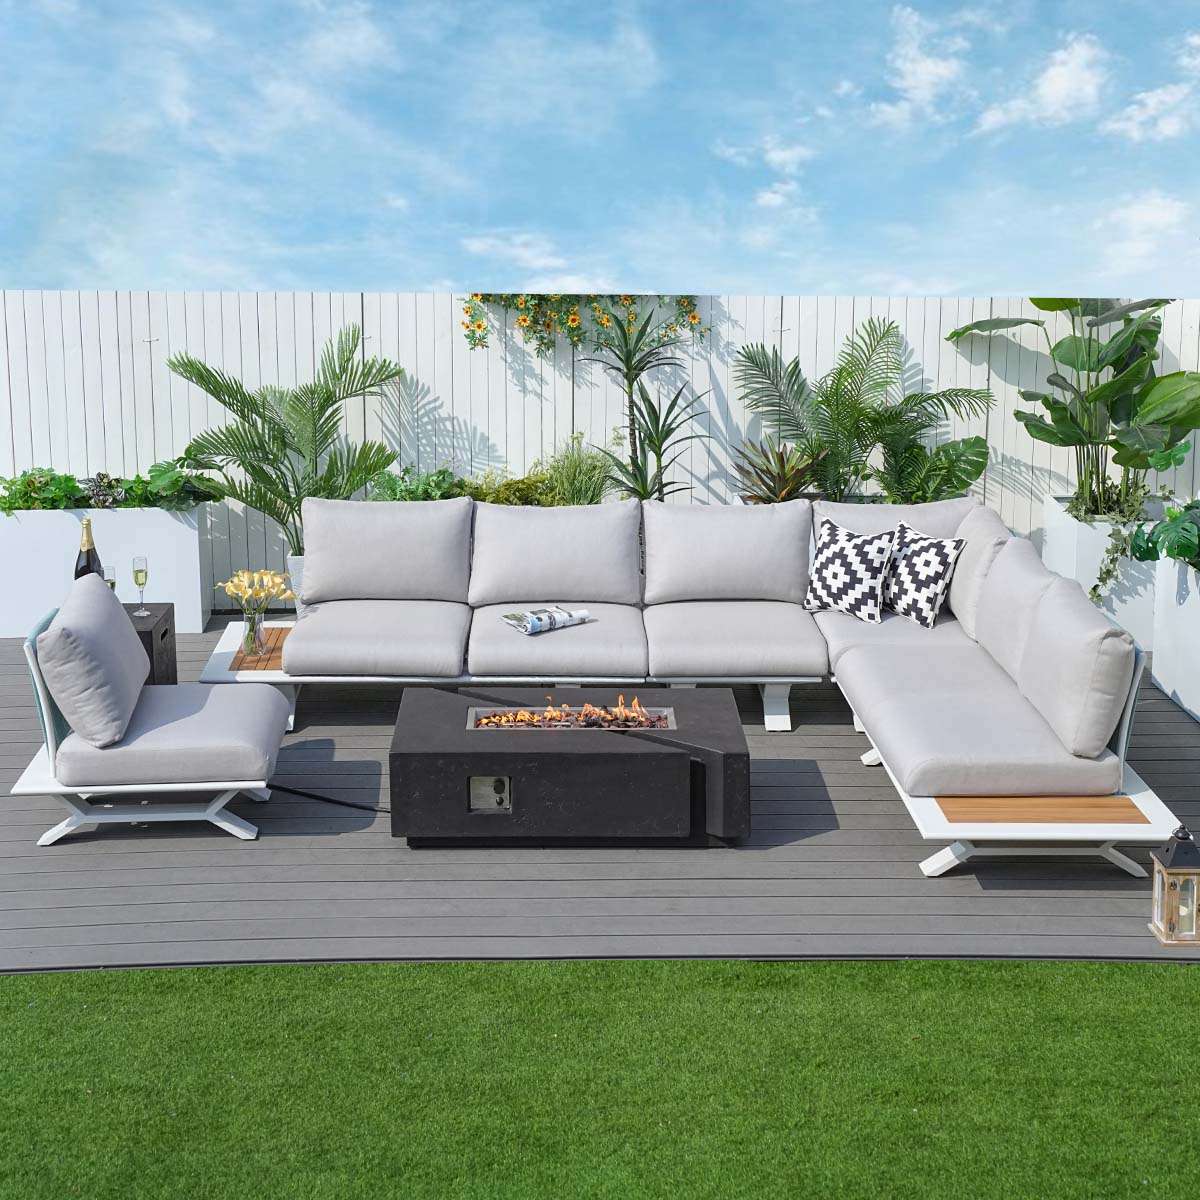 The latest furniture on the market - Abrihome White 6-Pieces Patio Garden Aluminum Seating Set